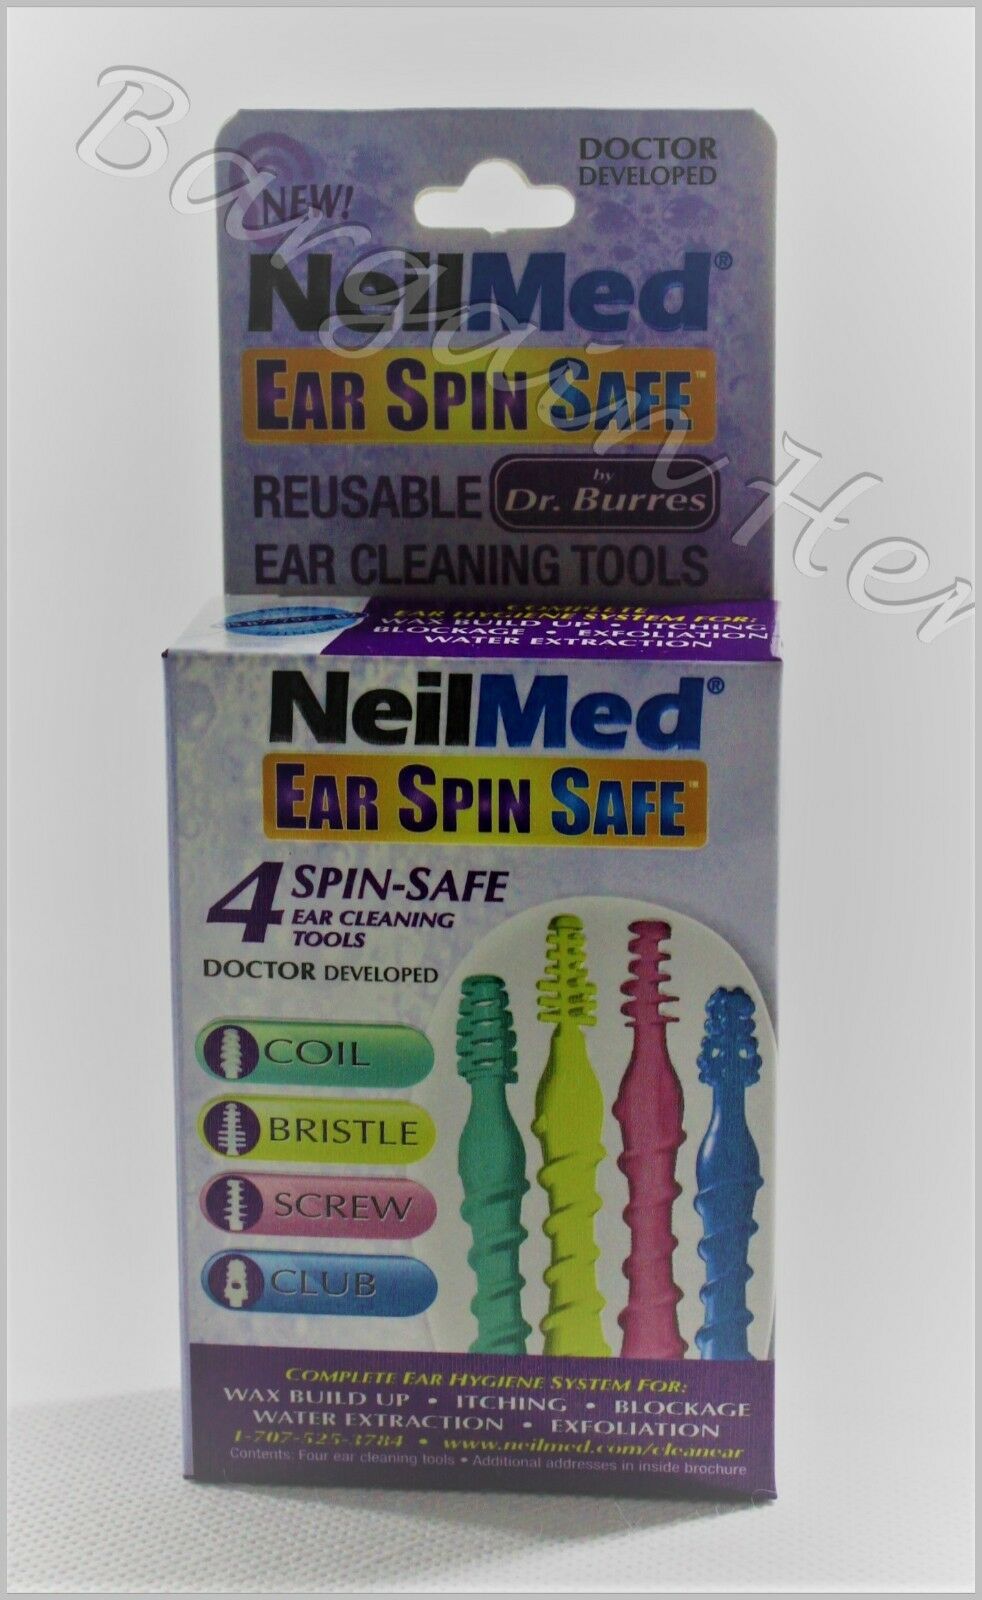 Neilmed Ear Cleaner Spin Safe 4 Pcs Ear Cleaning Tools New Free Shipping